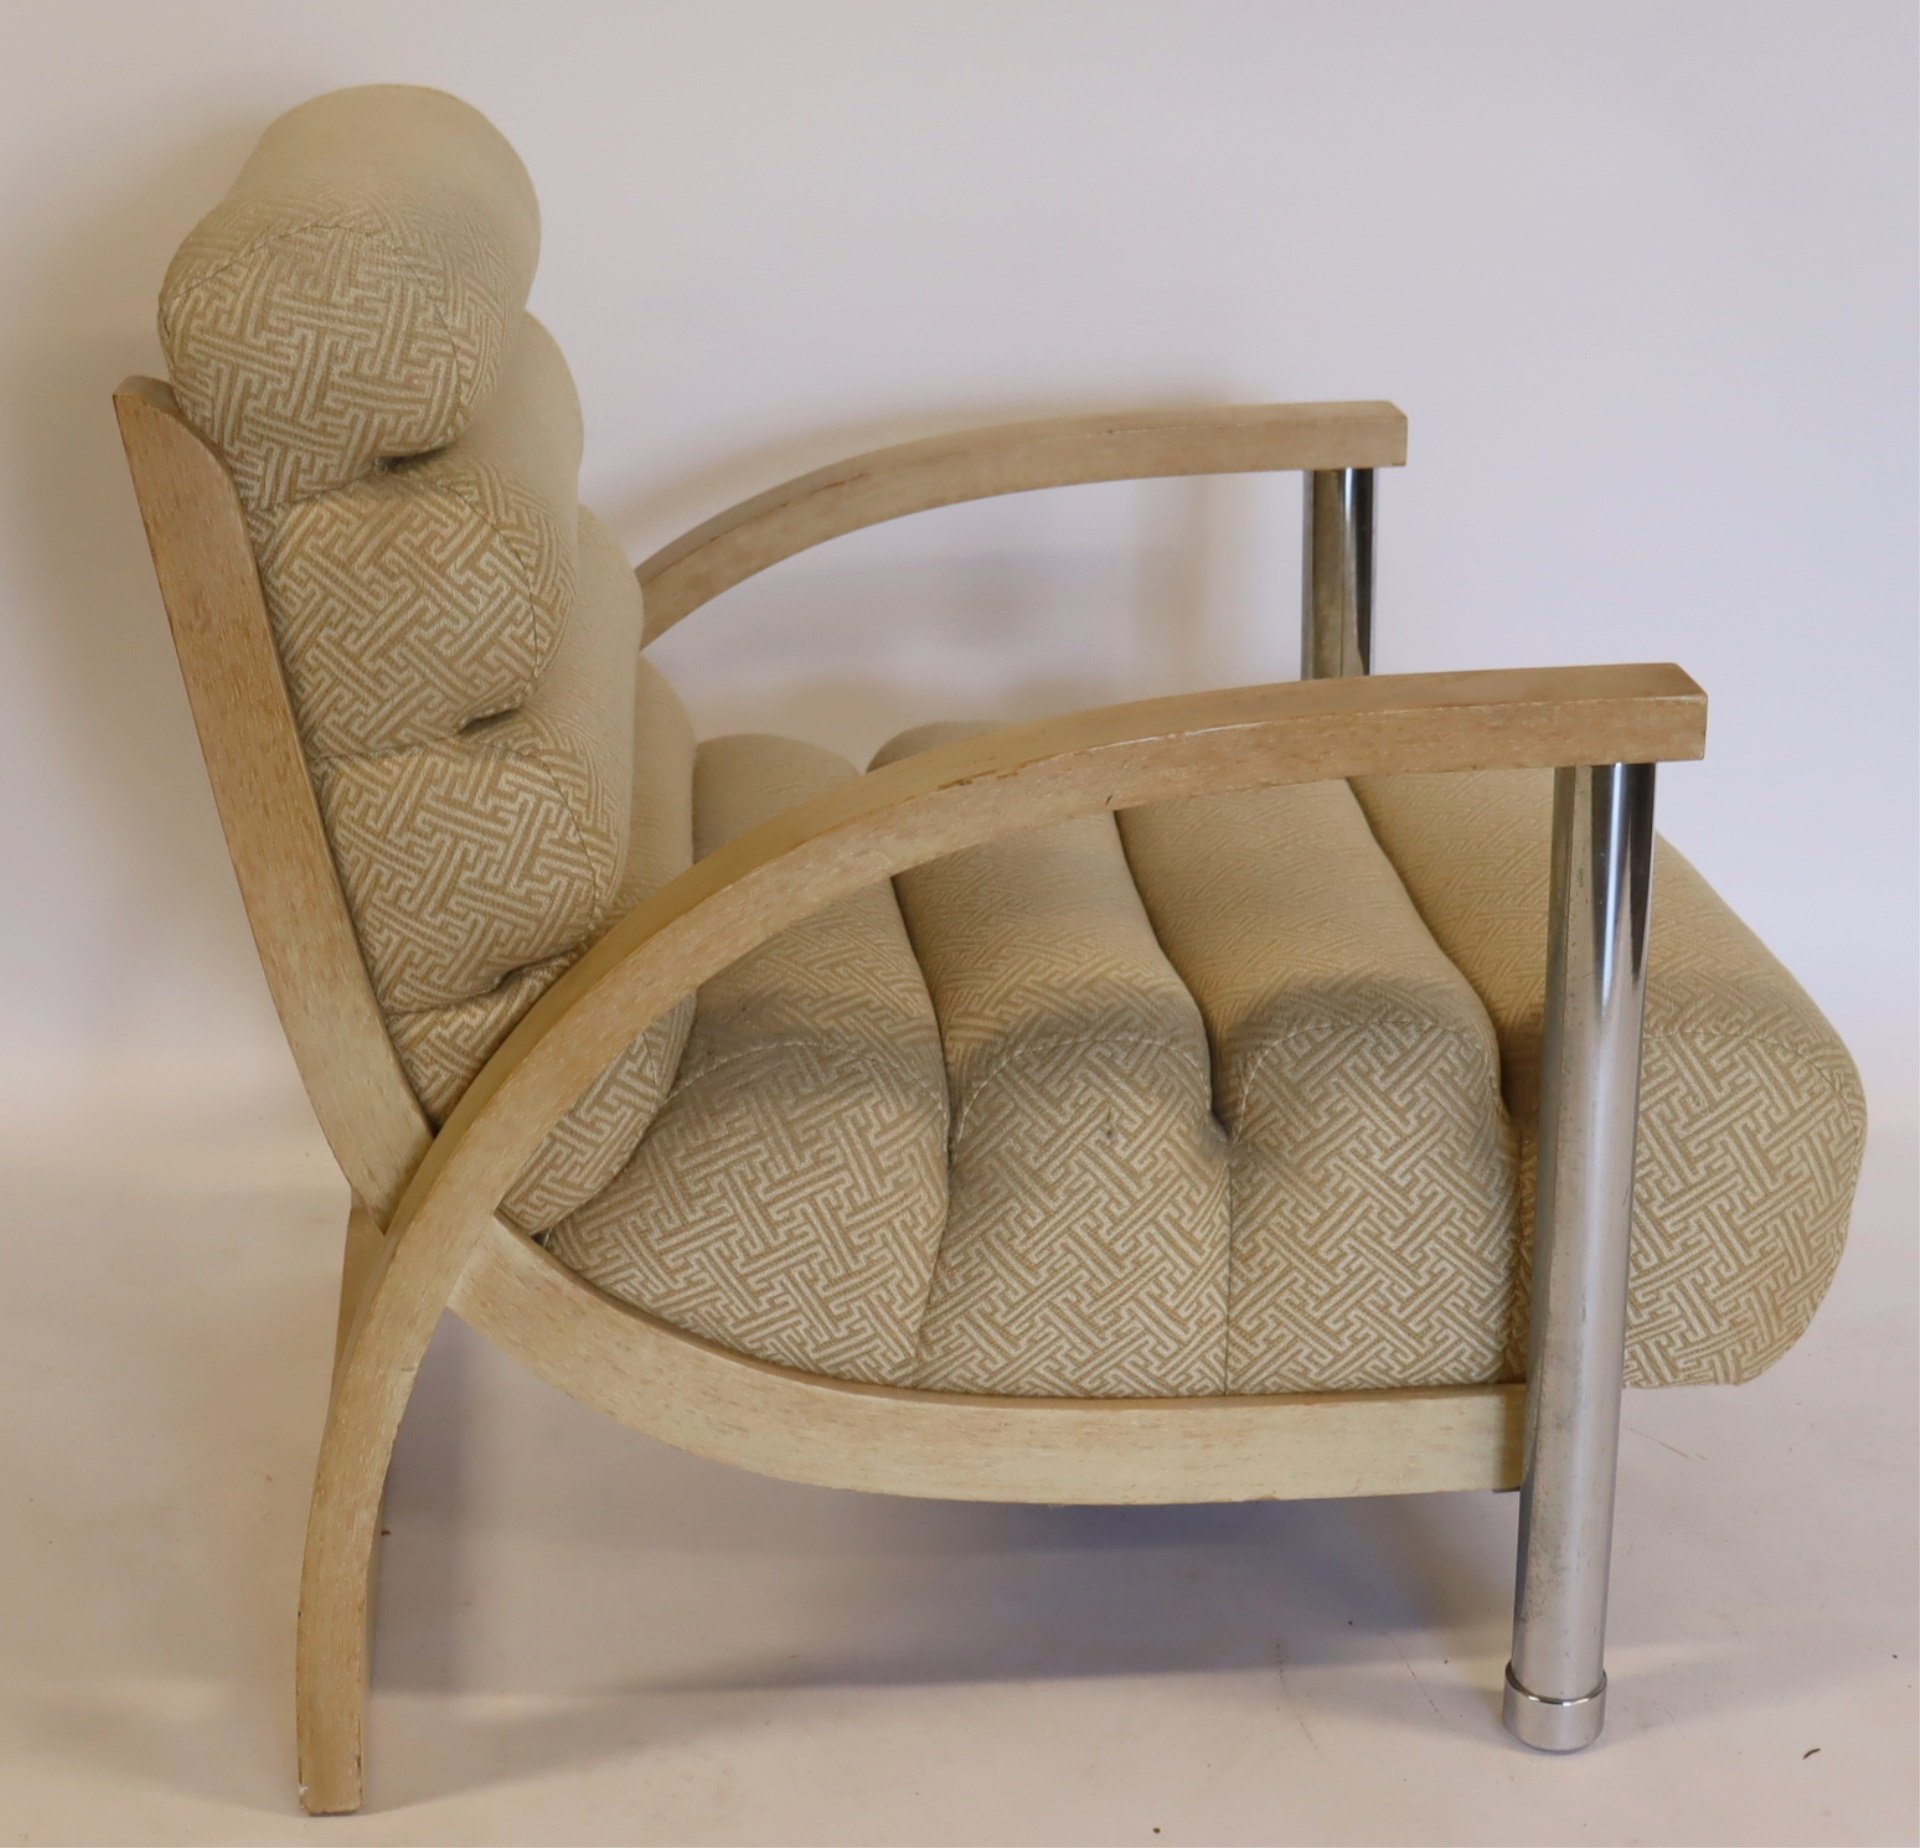 JAY SPECTER LOUNGE CHAIR. From